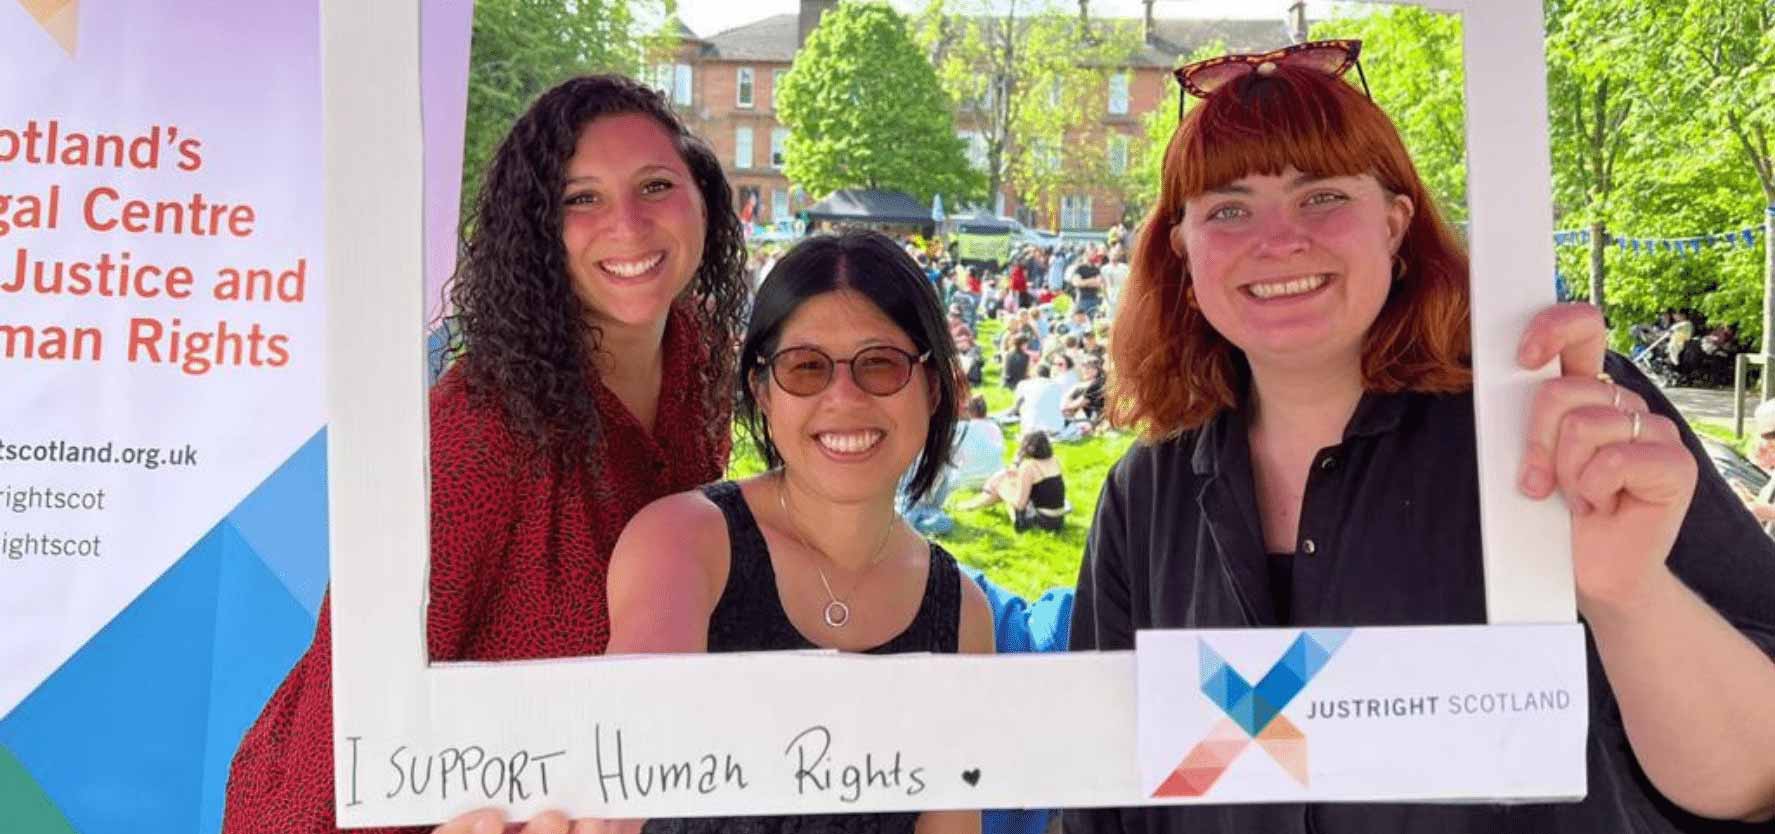 Three members of the team from JustRight Scotland are pictured inside a frame which reads 'I support human rights'. Picture: JustRight Scotland